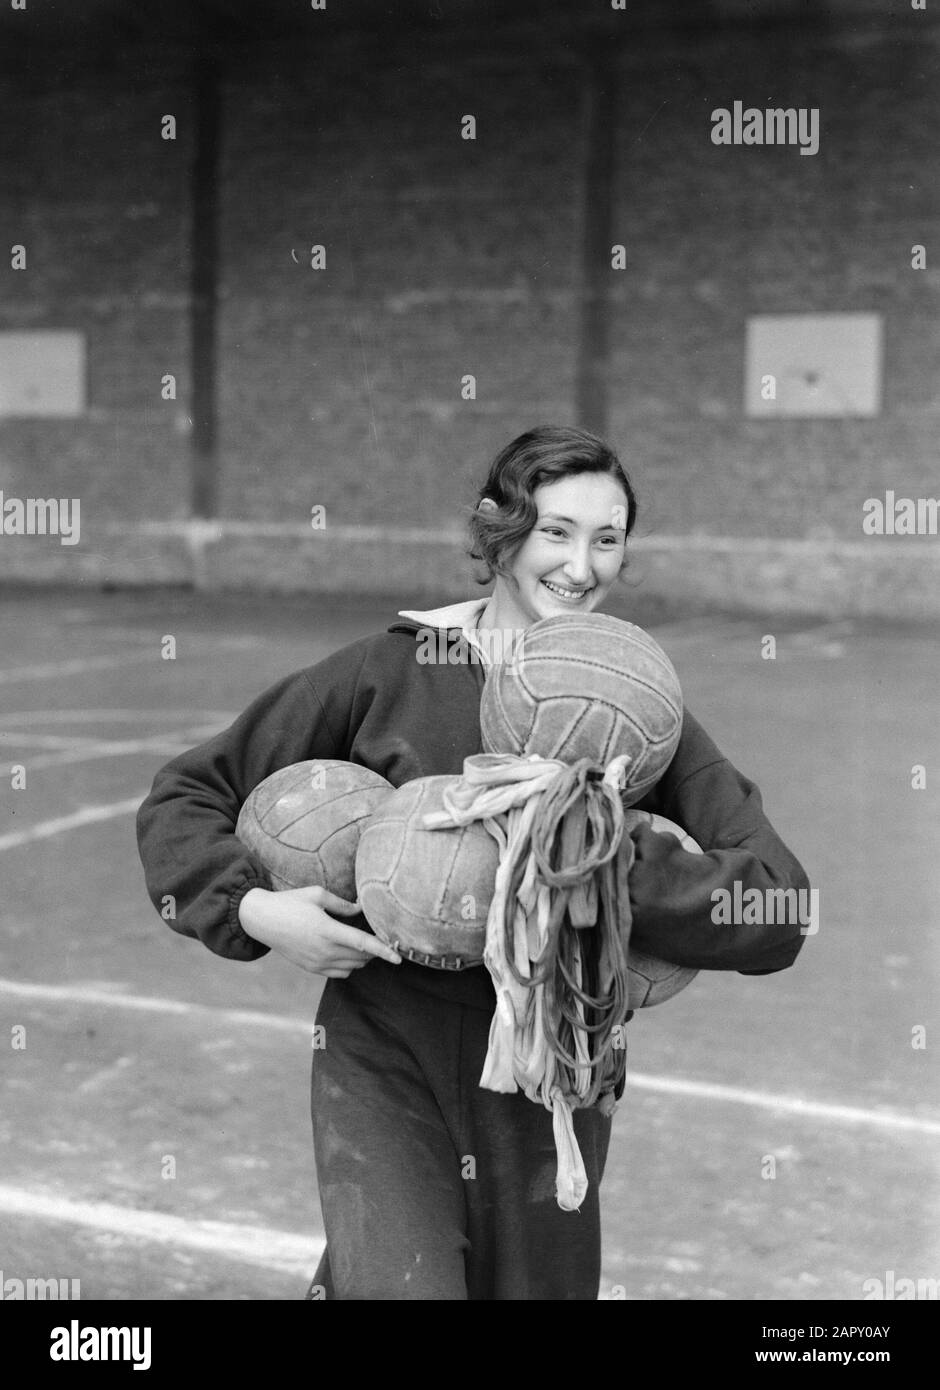 Travel to Poland  Warsaw. Central Institute for Physical Exercise: a female pupil wears three big balls Date: 1934 Location: Poland, Warsaw Keywords: physical education, students Stock Photo